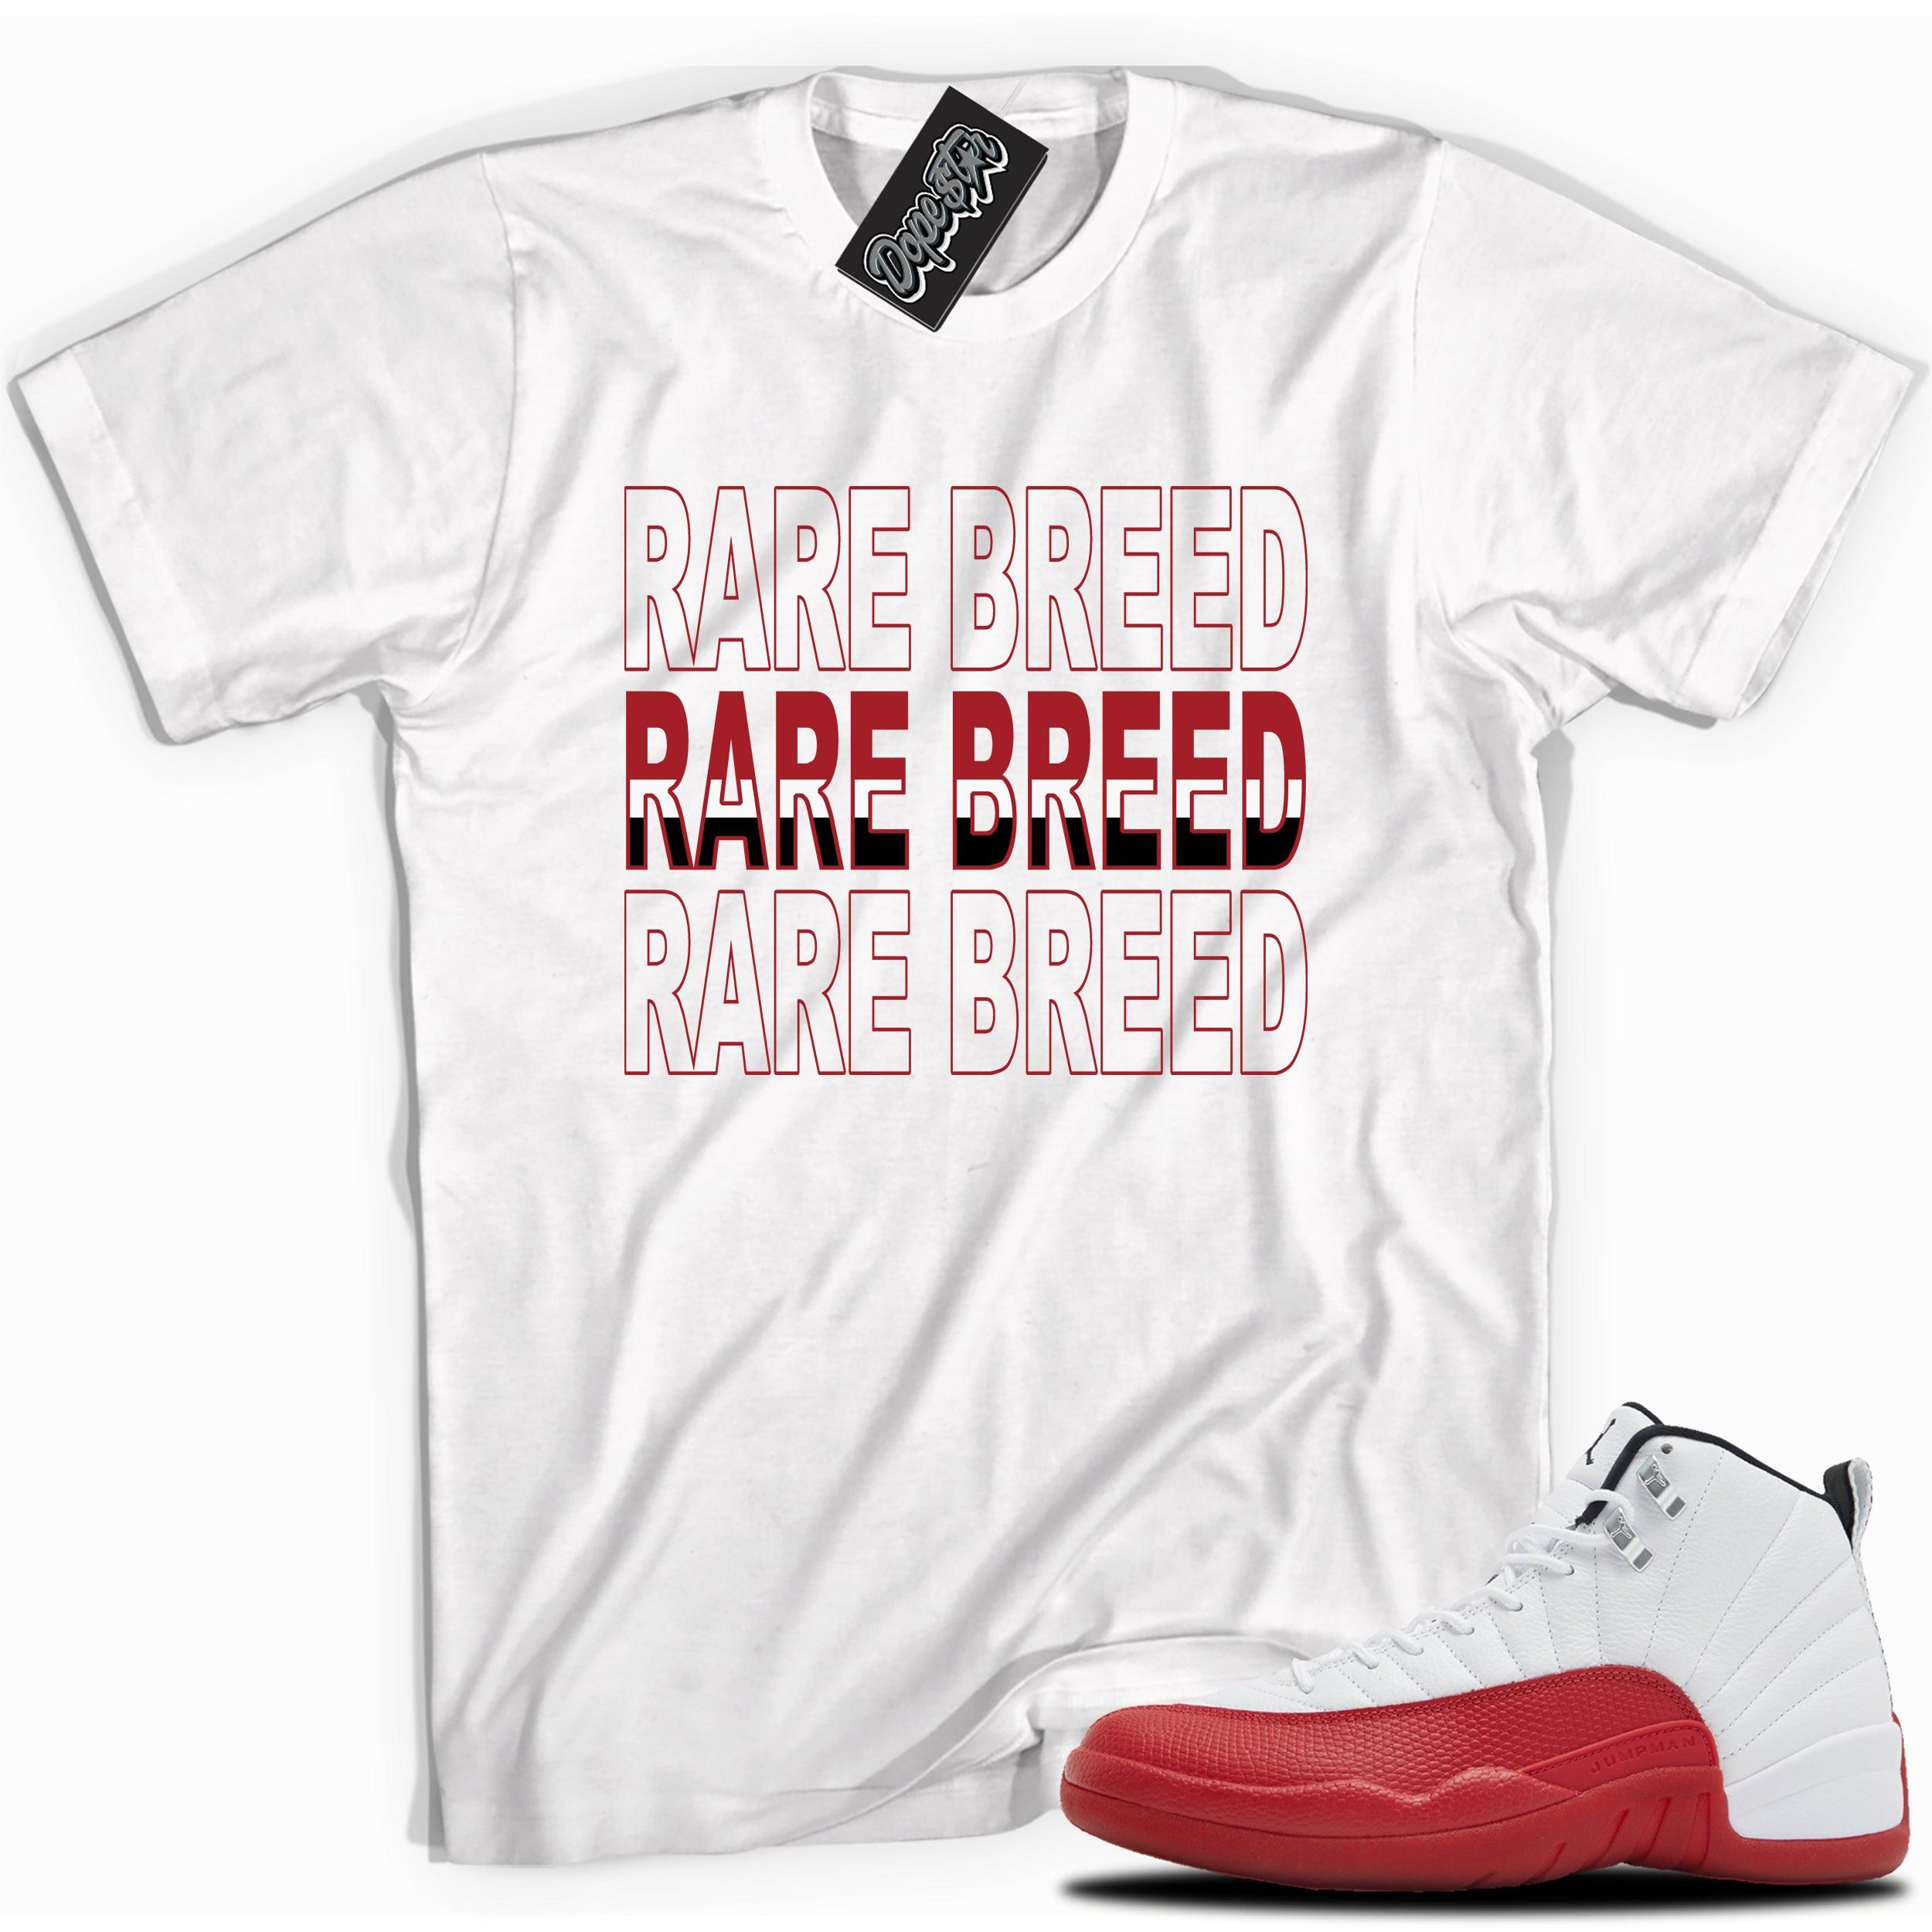 Cool White graphic tee with “RARE BREED” print, that perfectly matches Air Jordan 12 Retro Cherry Red 2023 red and white sneakers